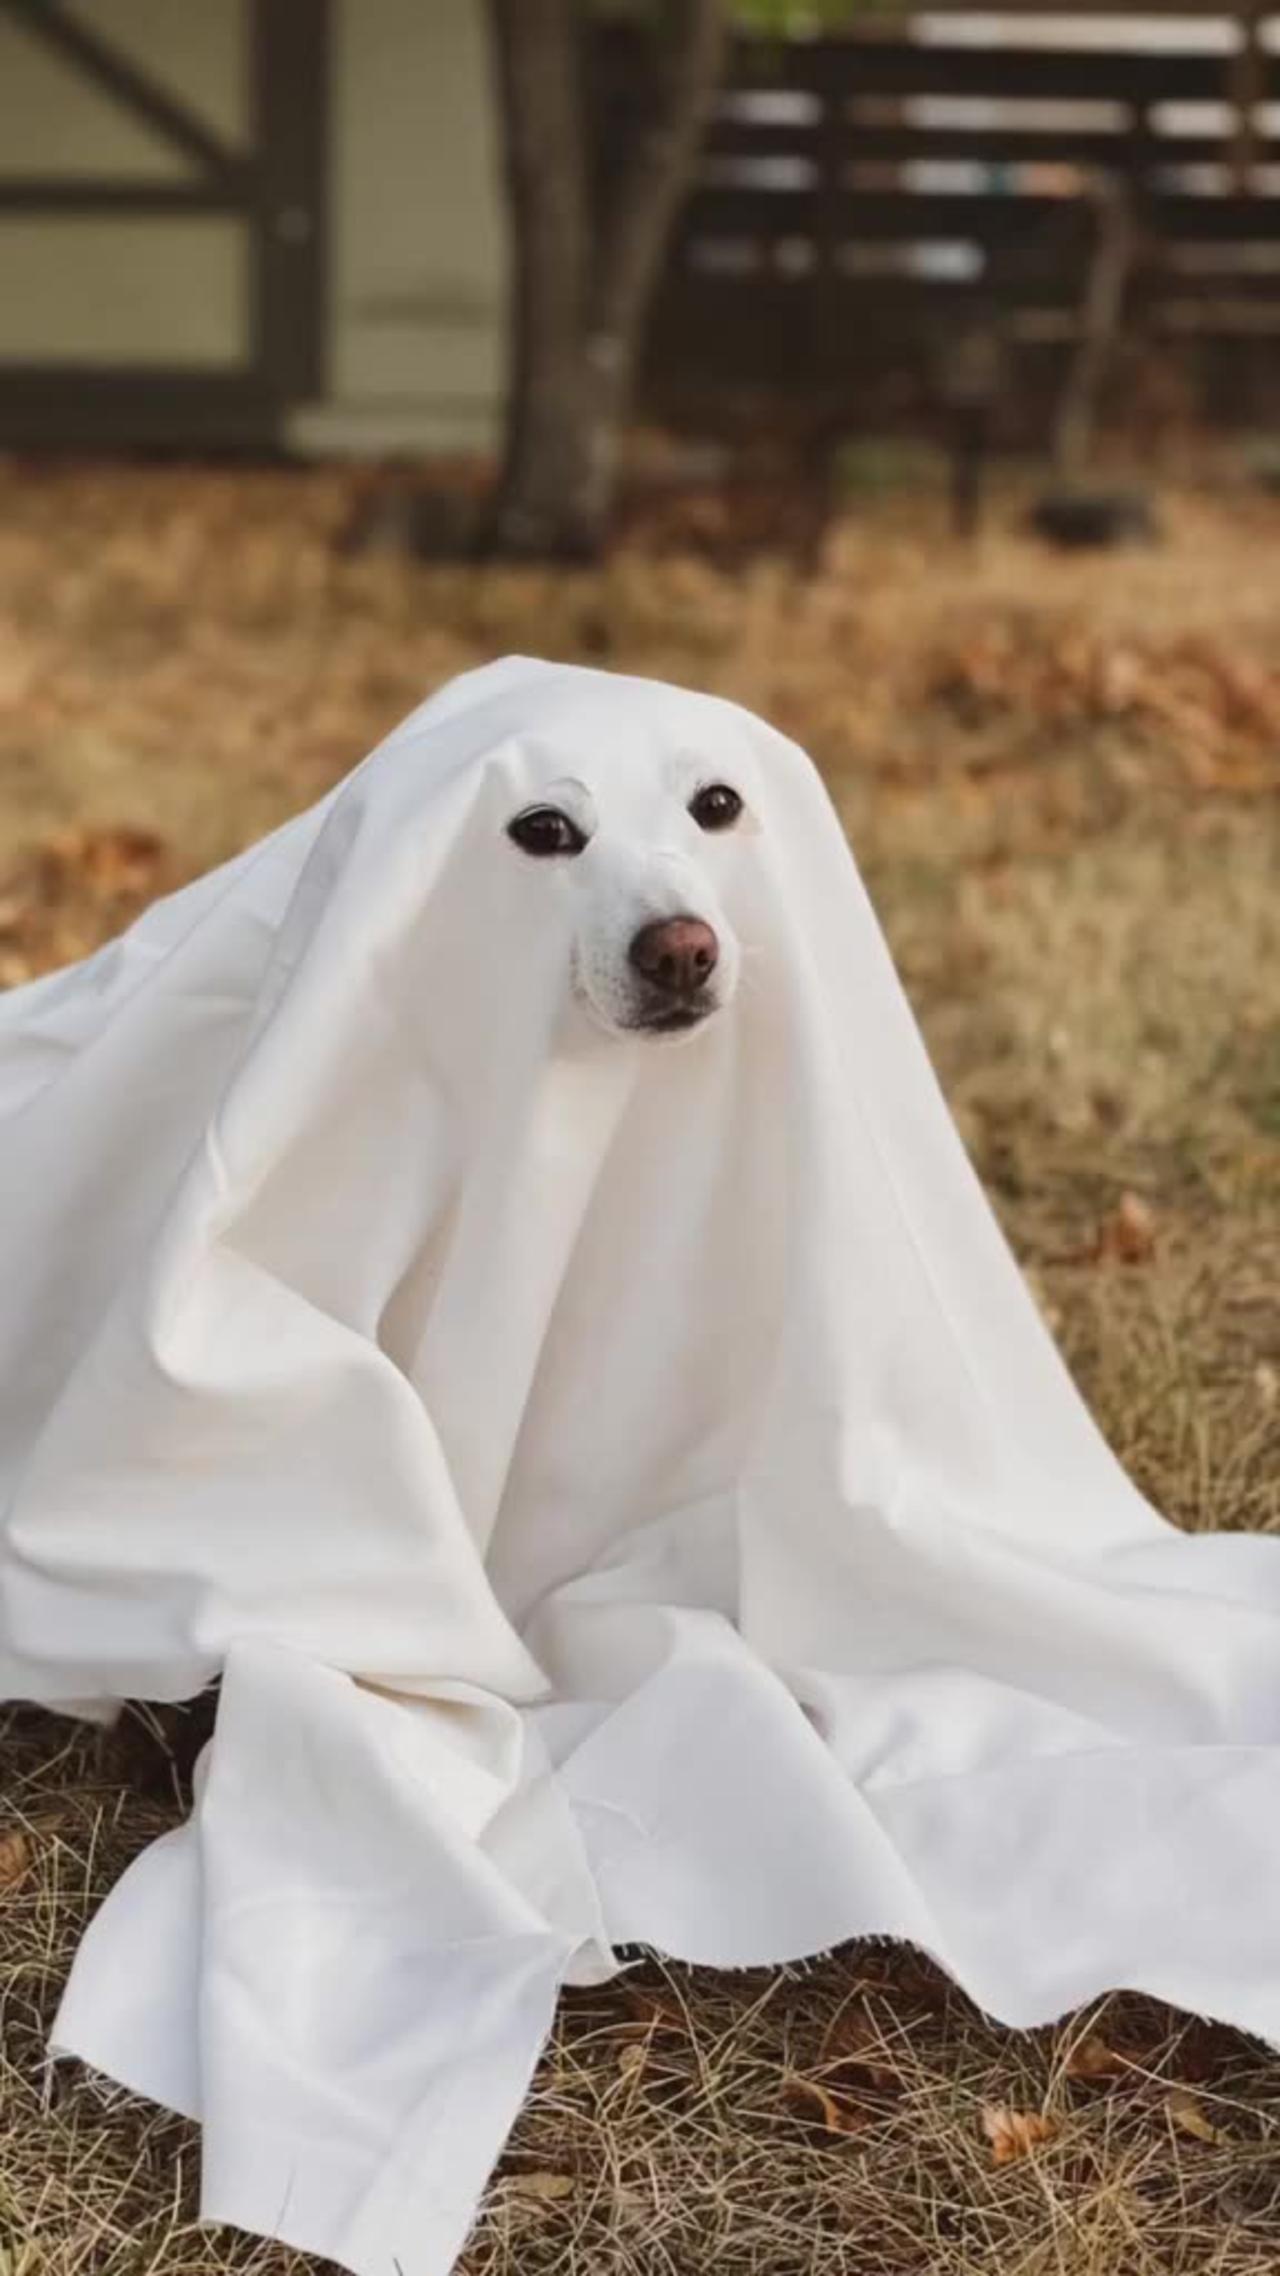 GhostlyGoodBoy, haunting the house with cuteness 👻🐾